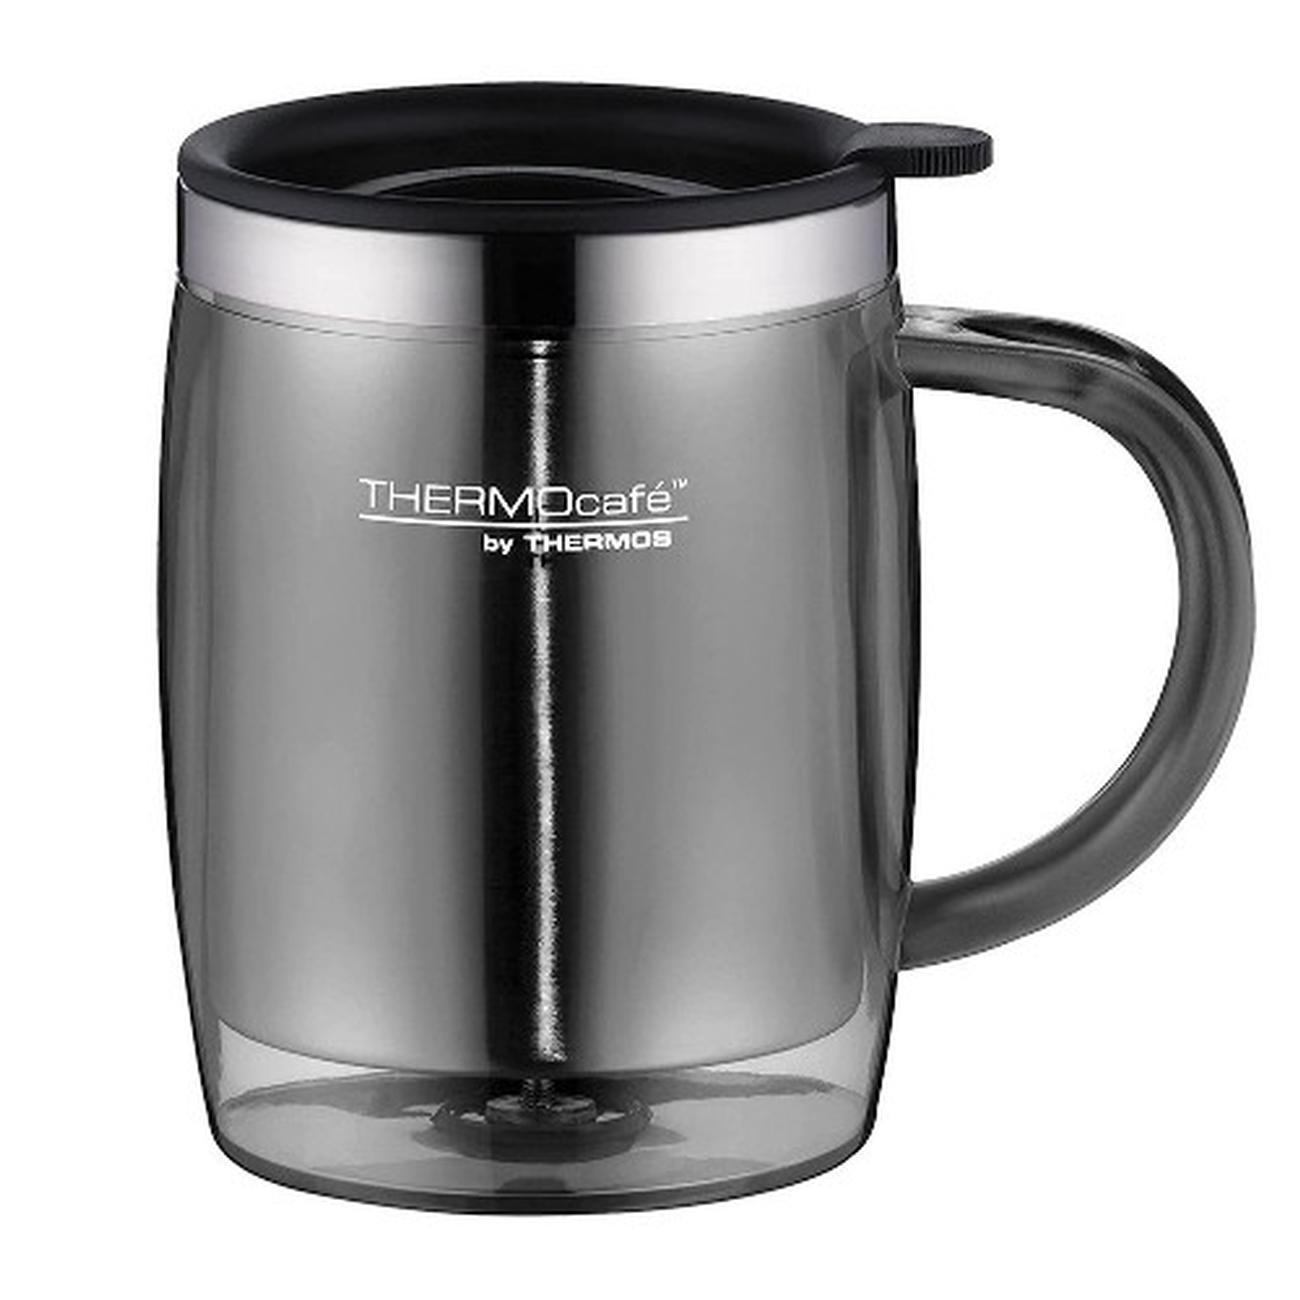 https://www.thekitchenwhisk.ie/contentfiles/productImages/Large/ThermoCafe-Desktop-Mug-Thermos-Cup-450ml-Gun-Metal.jpg